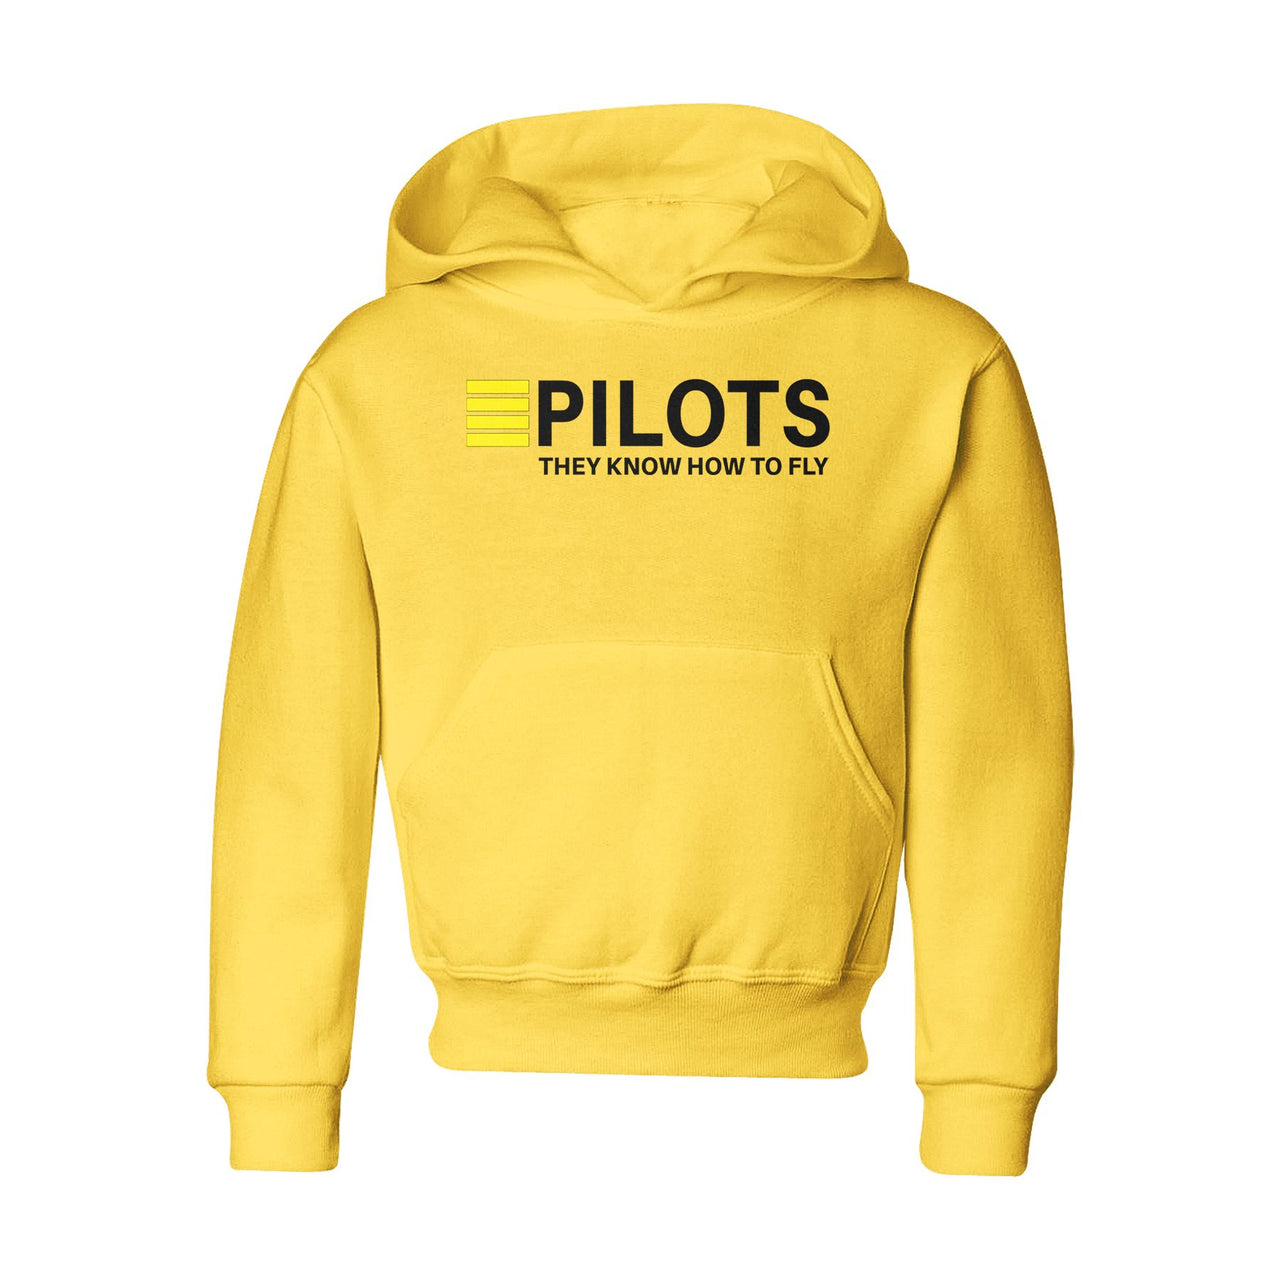 Pilots They Know How To Fly Designed "CHILDREN" Hoodies